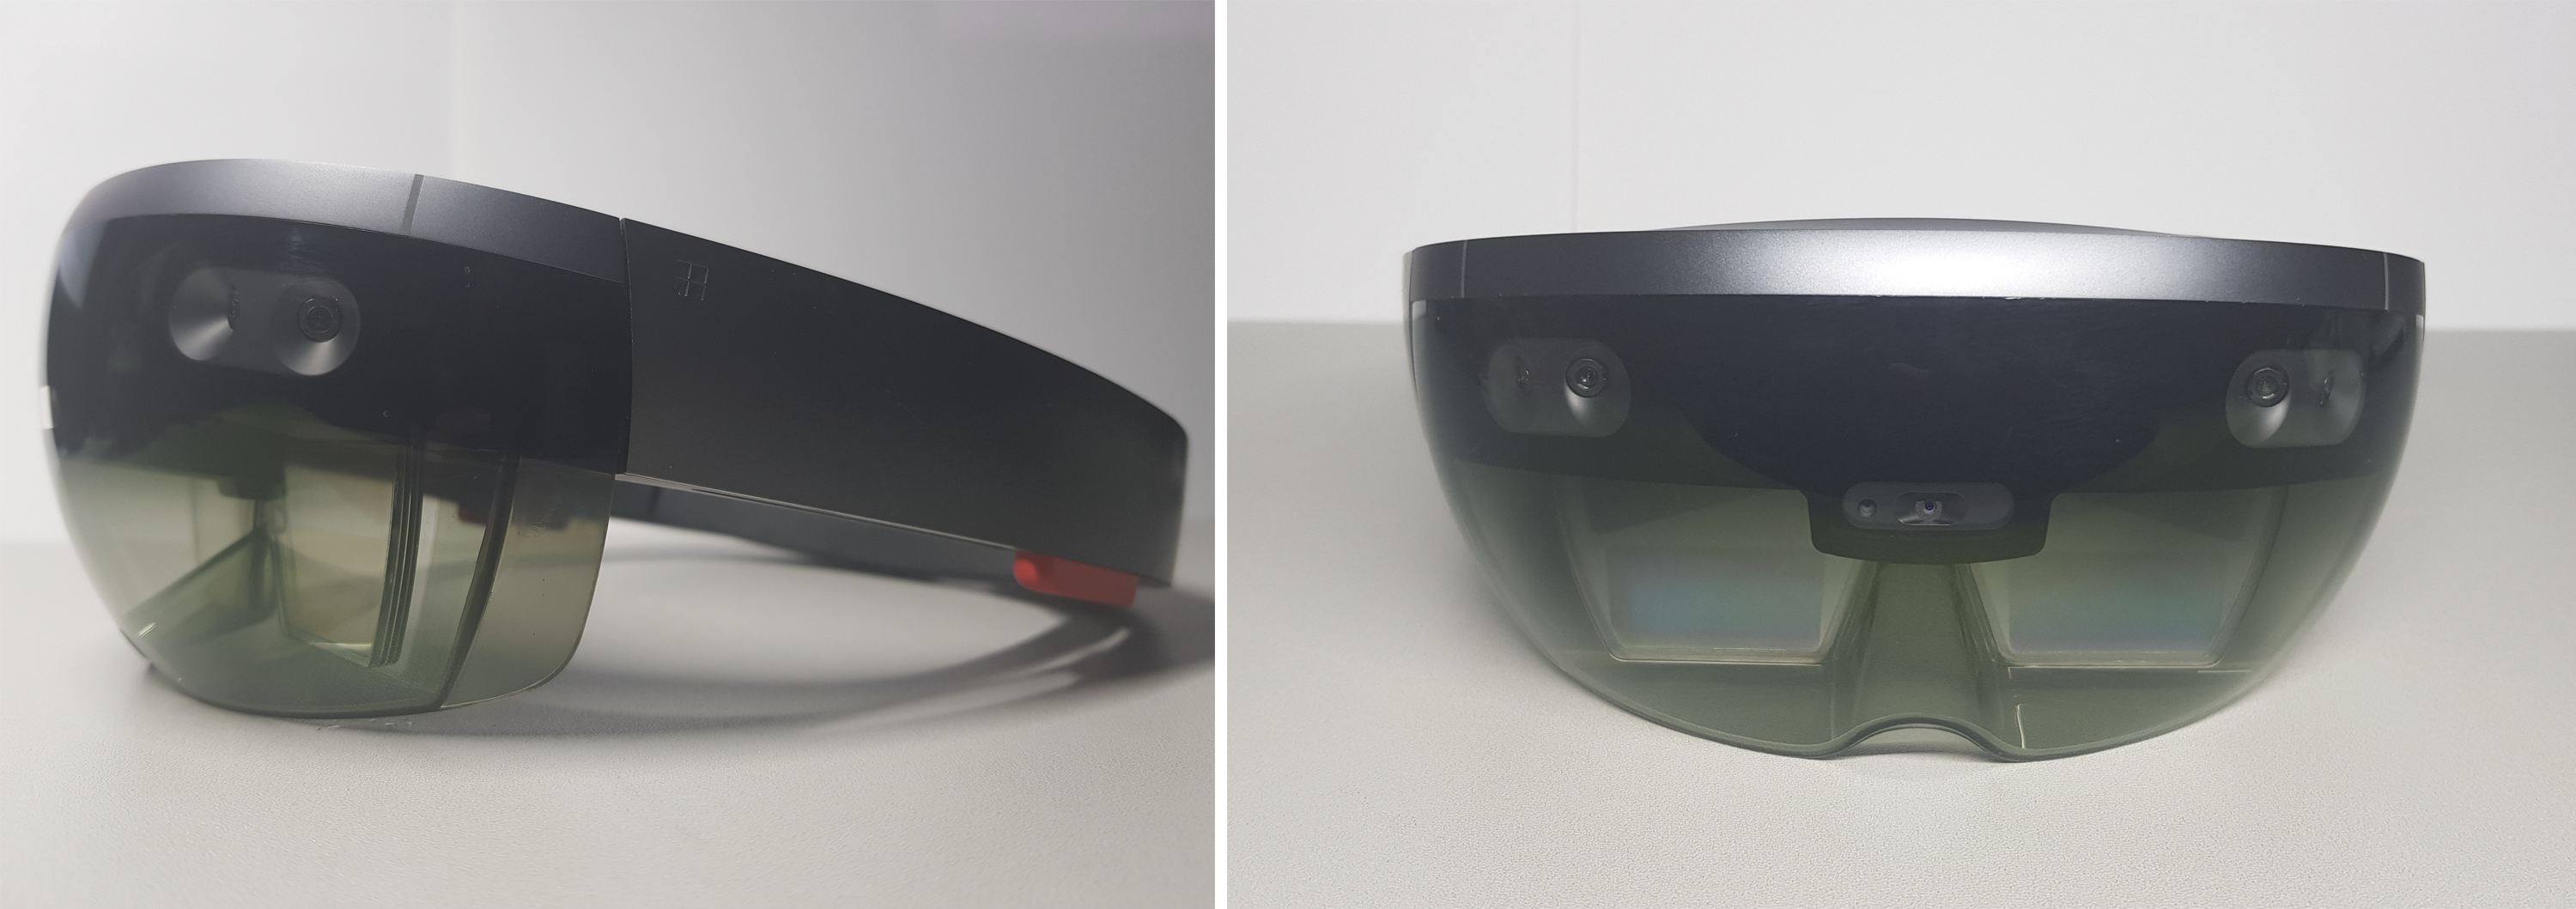 Images of HoloLens